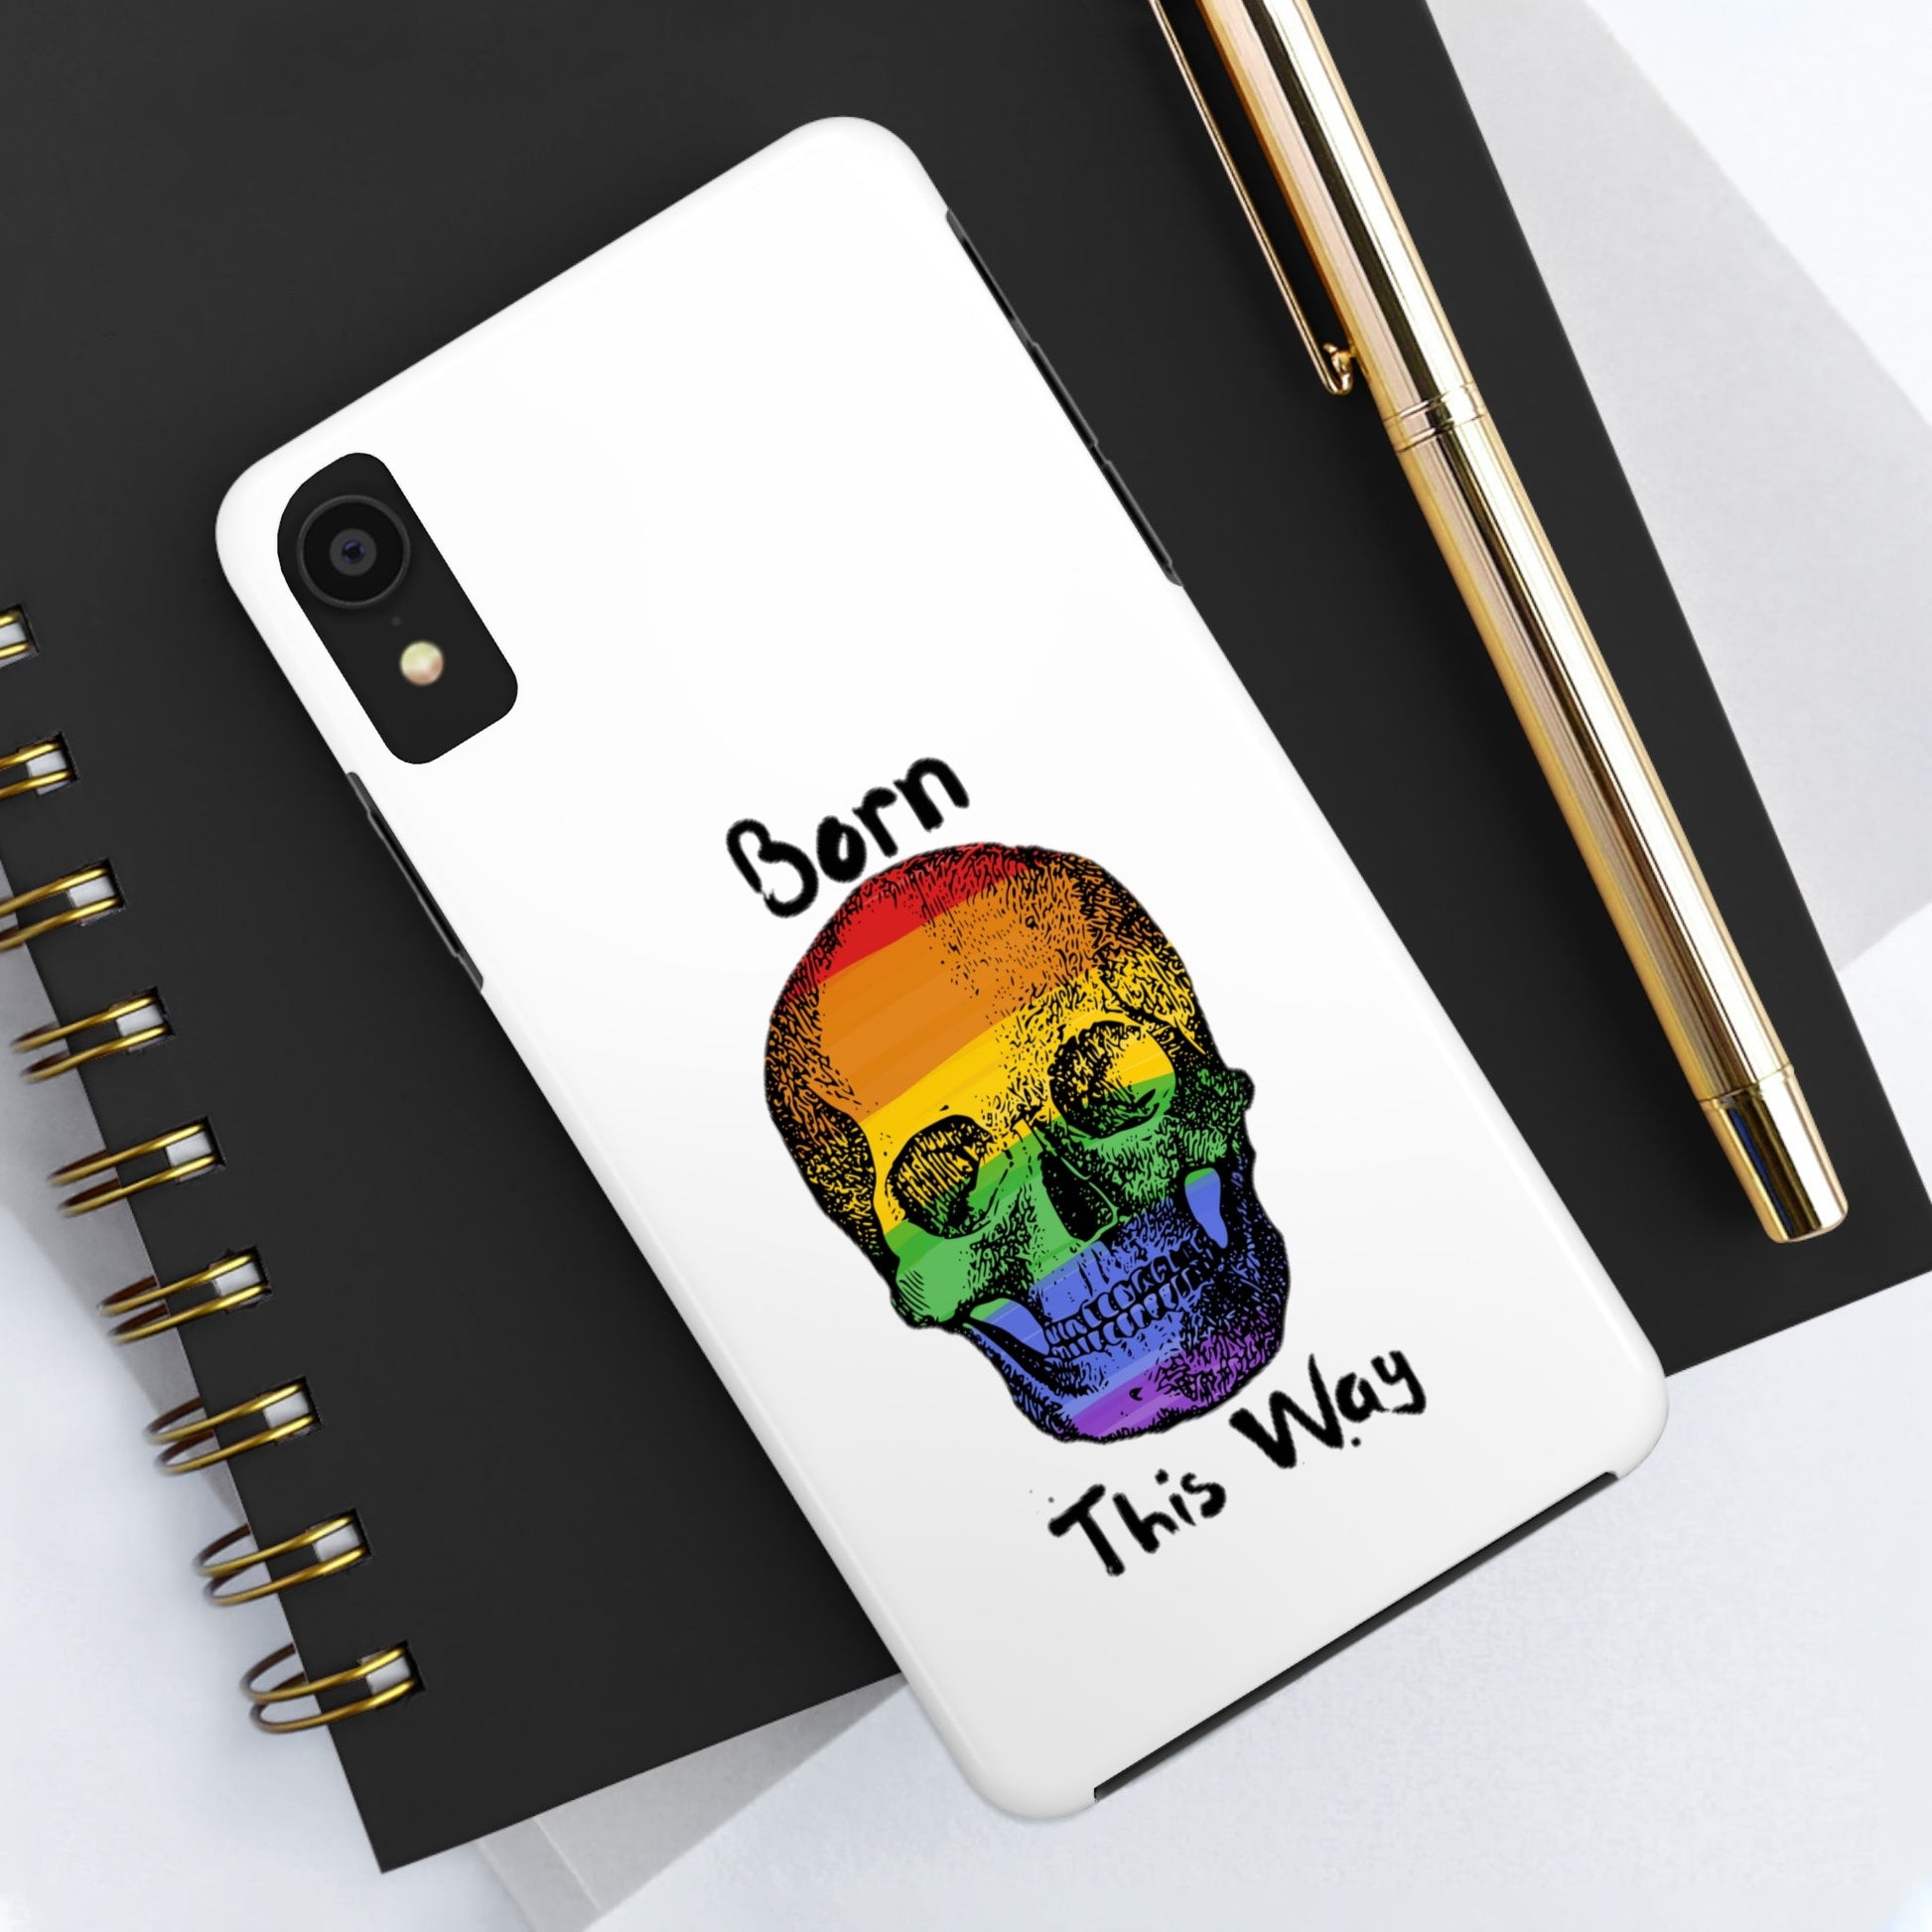 Born This Way Skeleton Pride Tough Phone Cases for iPhone 7, 8, X, 11, 12, 13, 14 and morePhone CaseVTZdesignsiPhone XRAccessoriesGlossyiPhone Cases